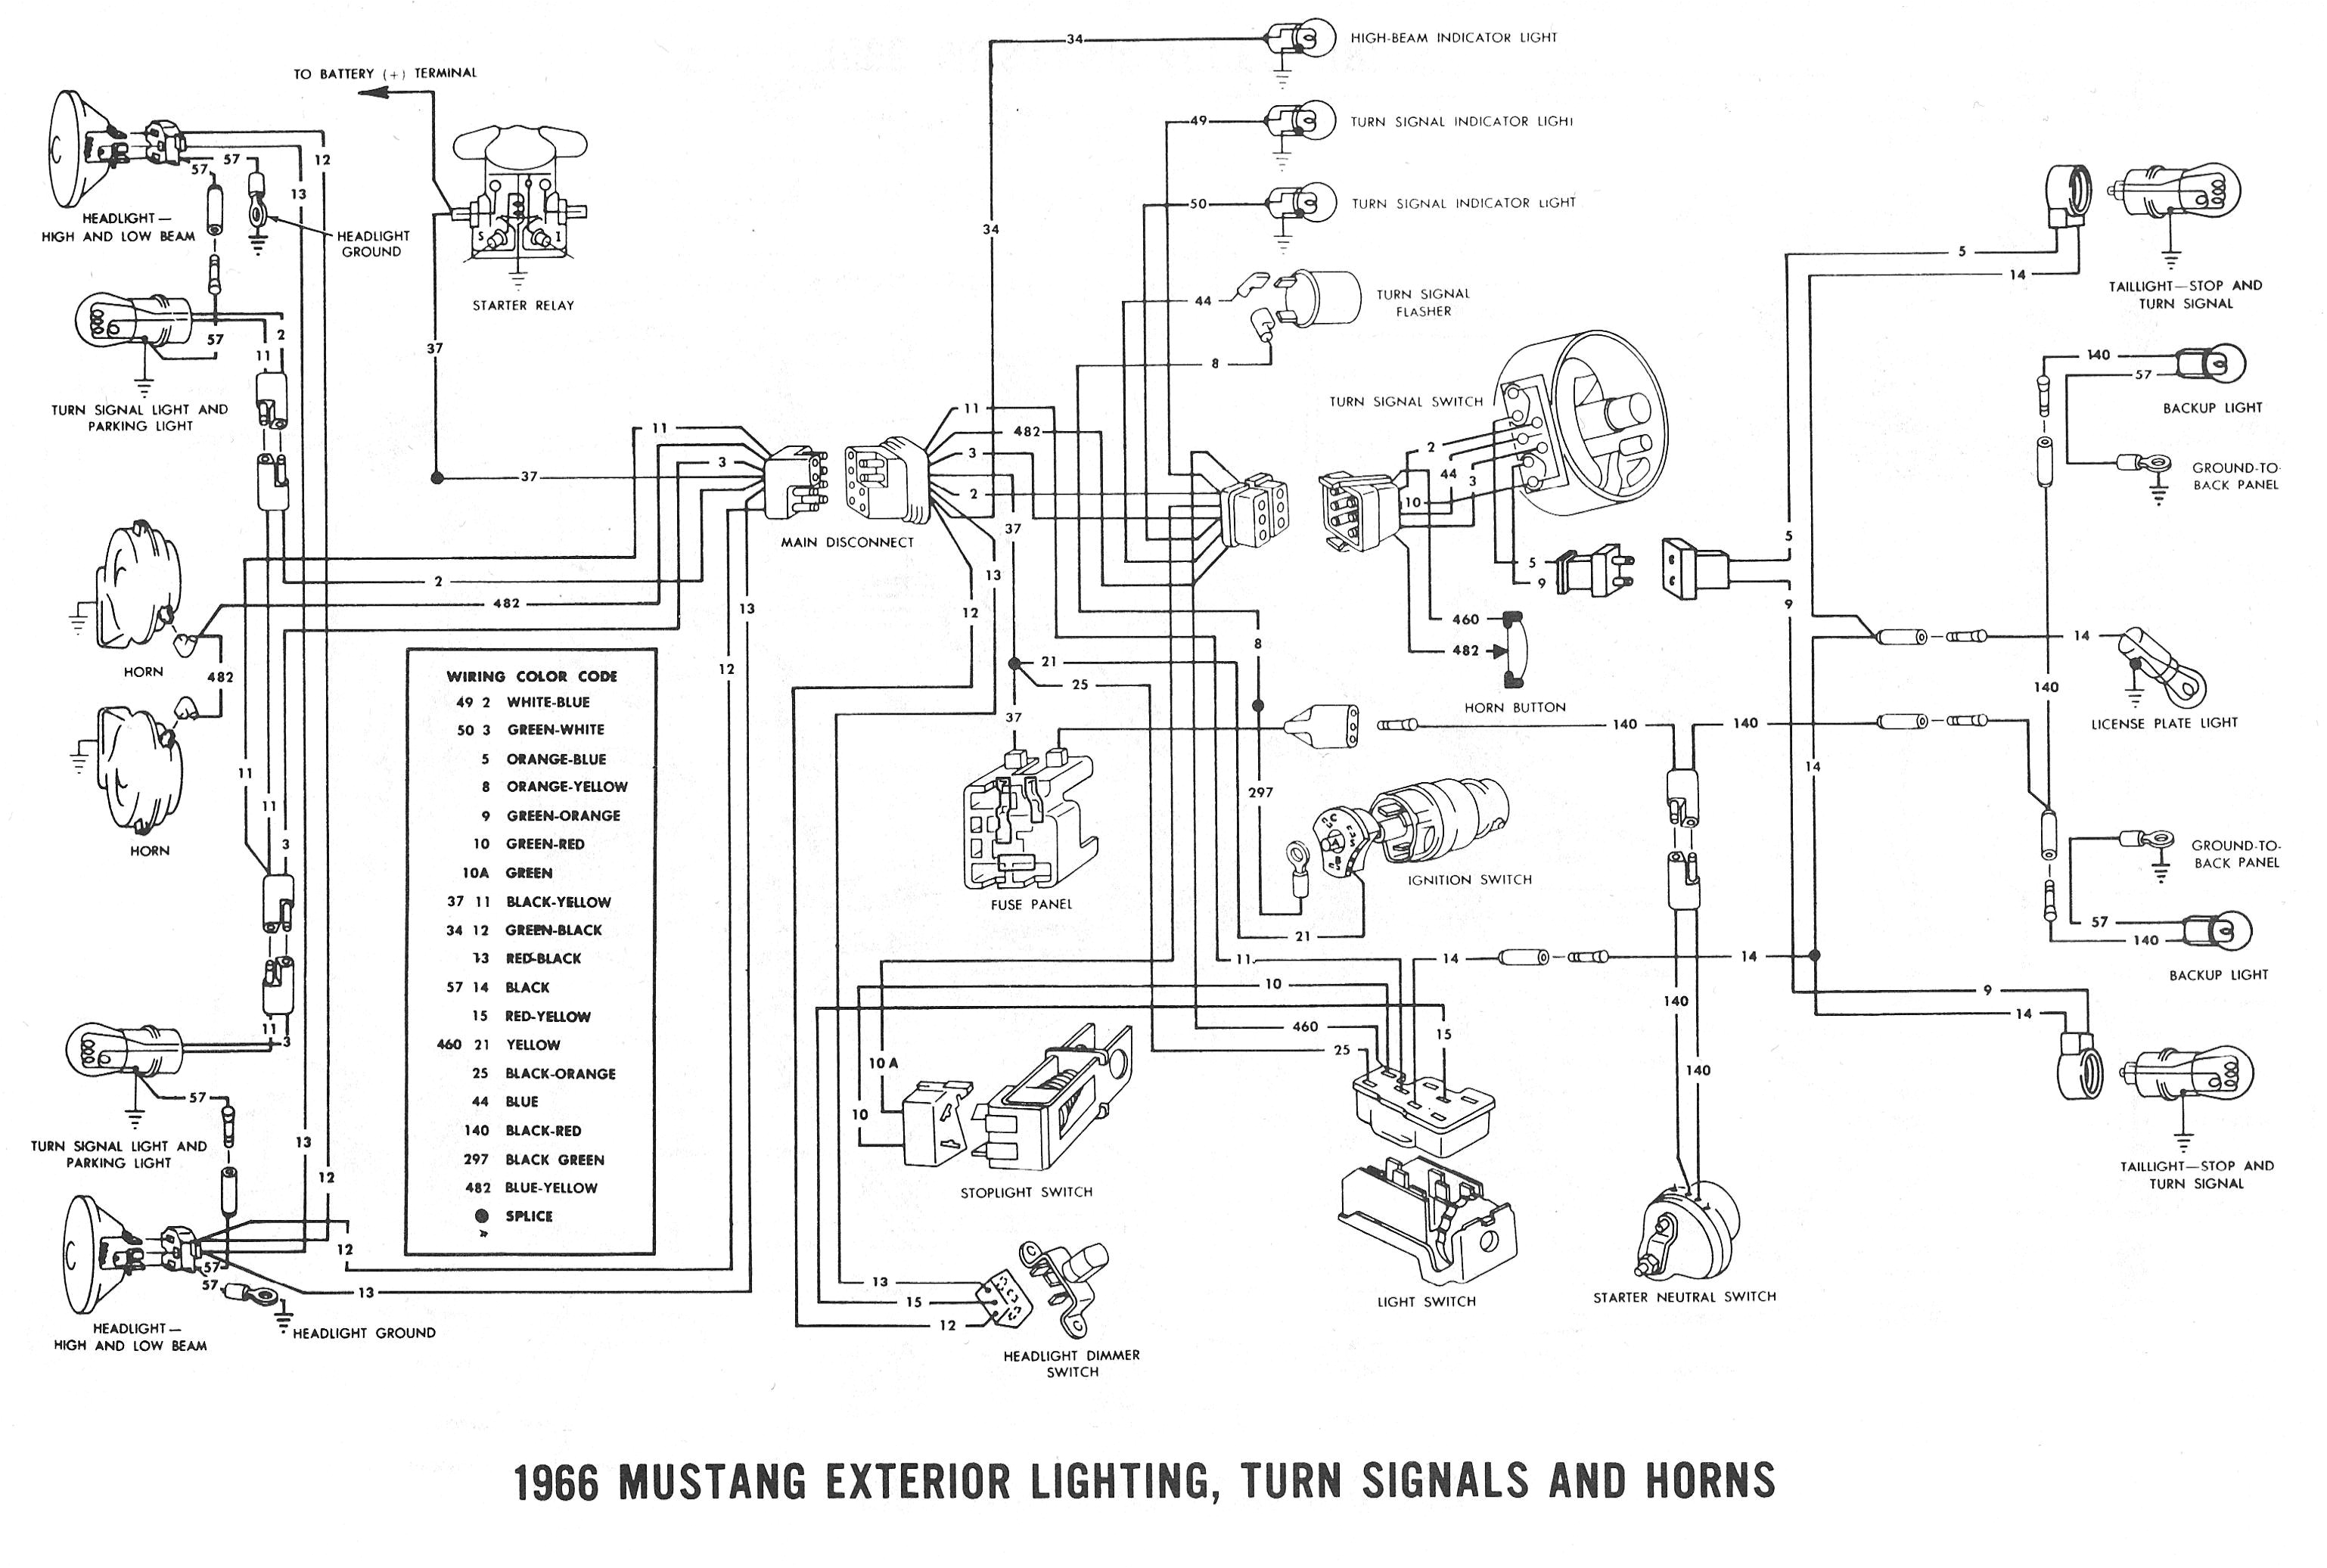 1966 mustang wiring diagram awesome got a wiring diagram from http wikidiyfaqorguk 0 0d s wire